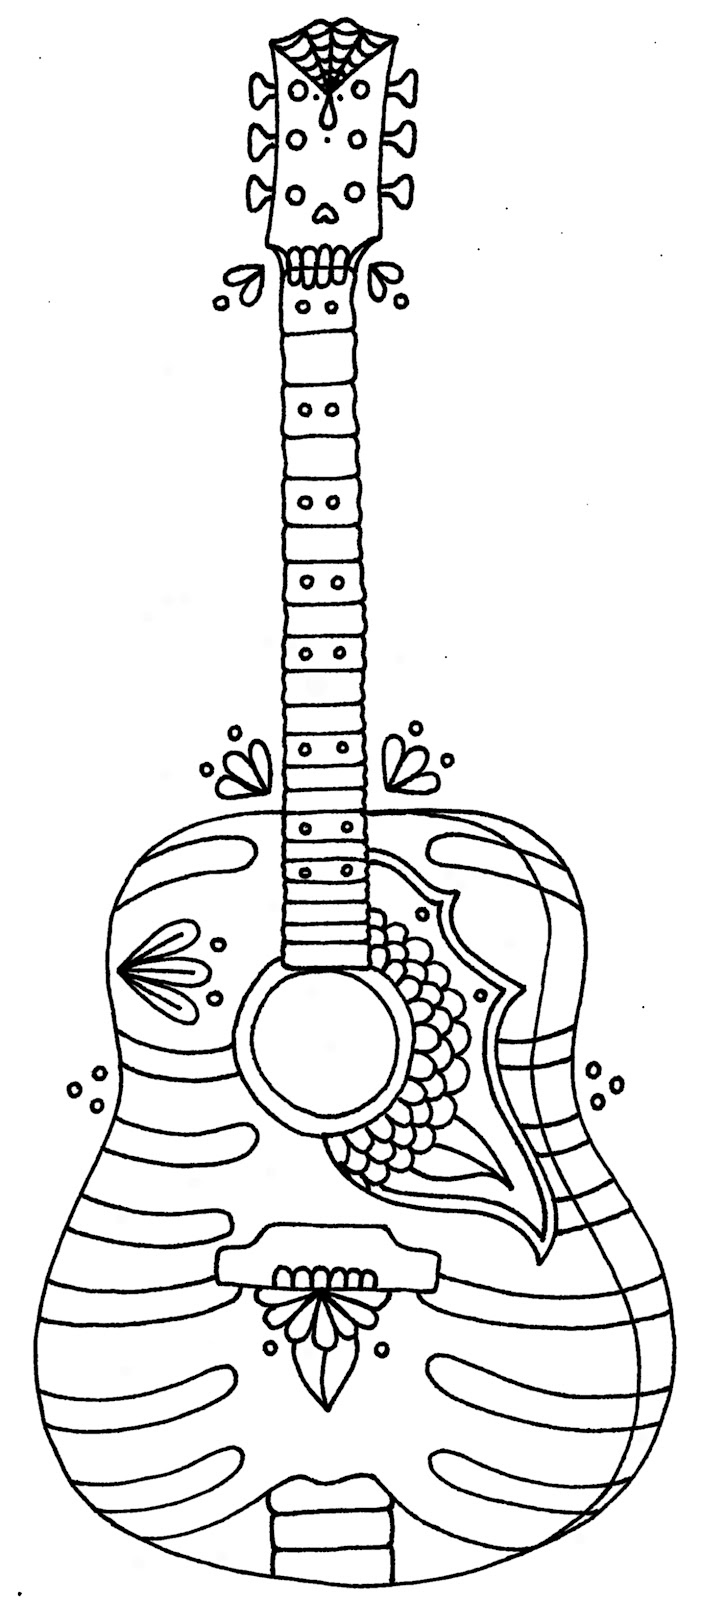 Acoustic Guitar Coloring Pages at GetColorings.com | Free ...